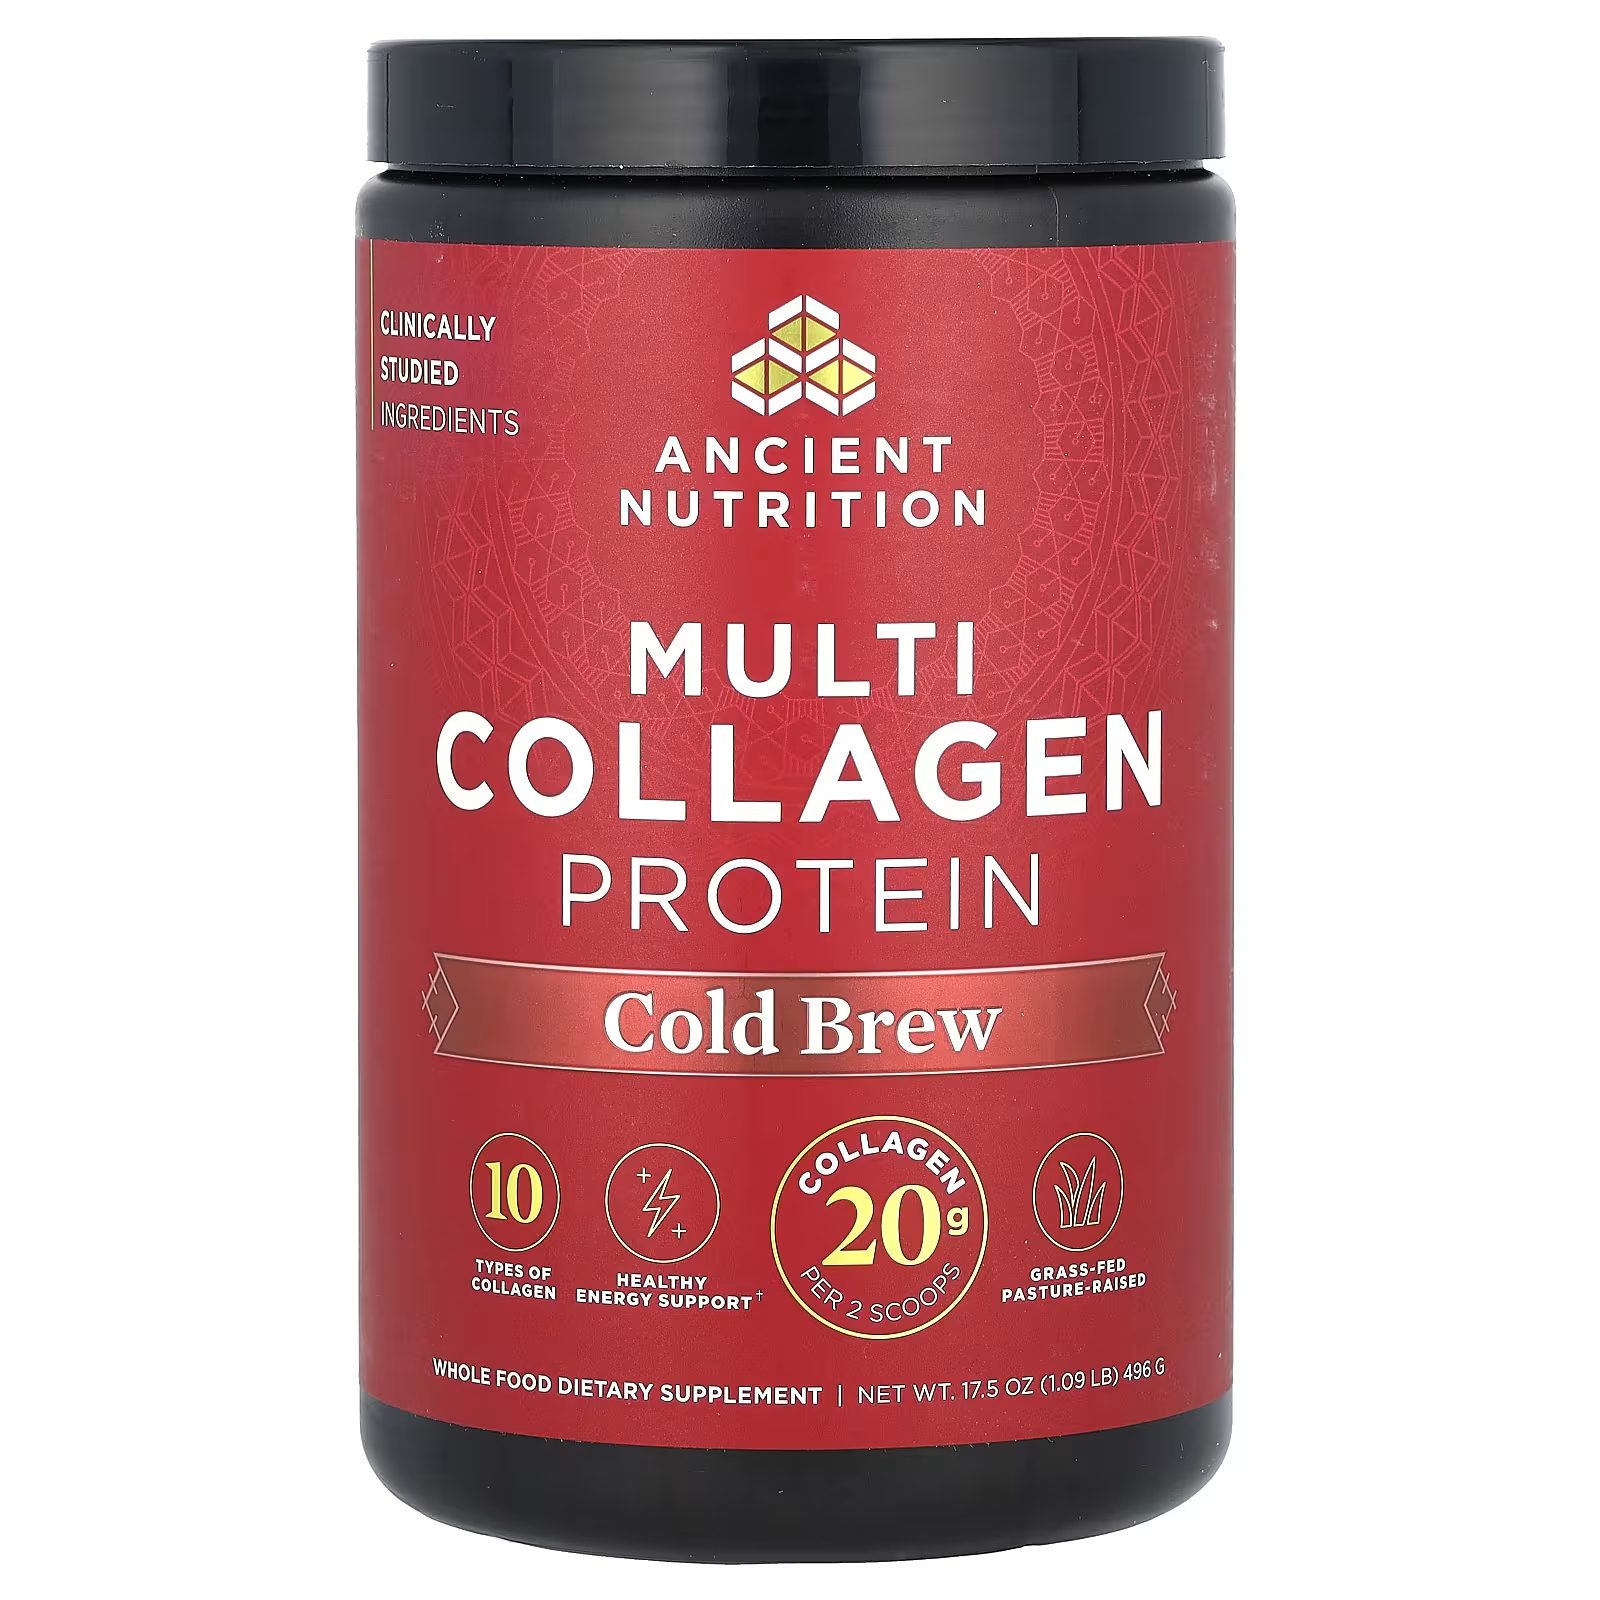 Пищевая добавка Ancient Nutrition Multi Collagen Protein Cold Brew, 496 г rsp nutrition truefit grass fed protein cold brew coffee 1 85 lbs 840 g